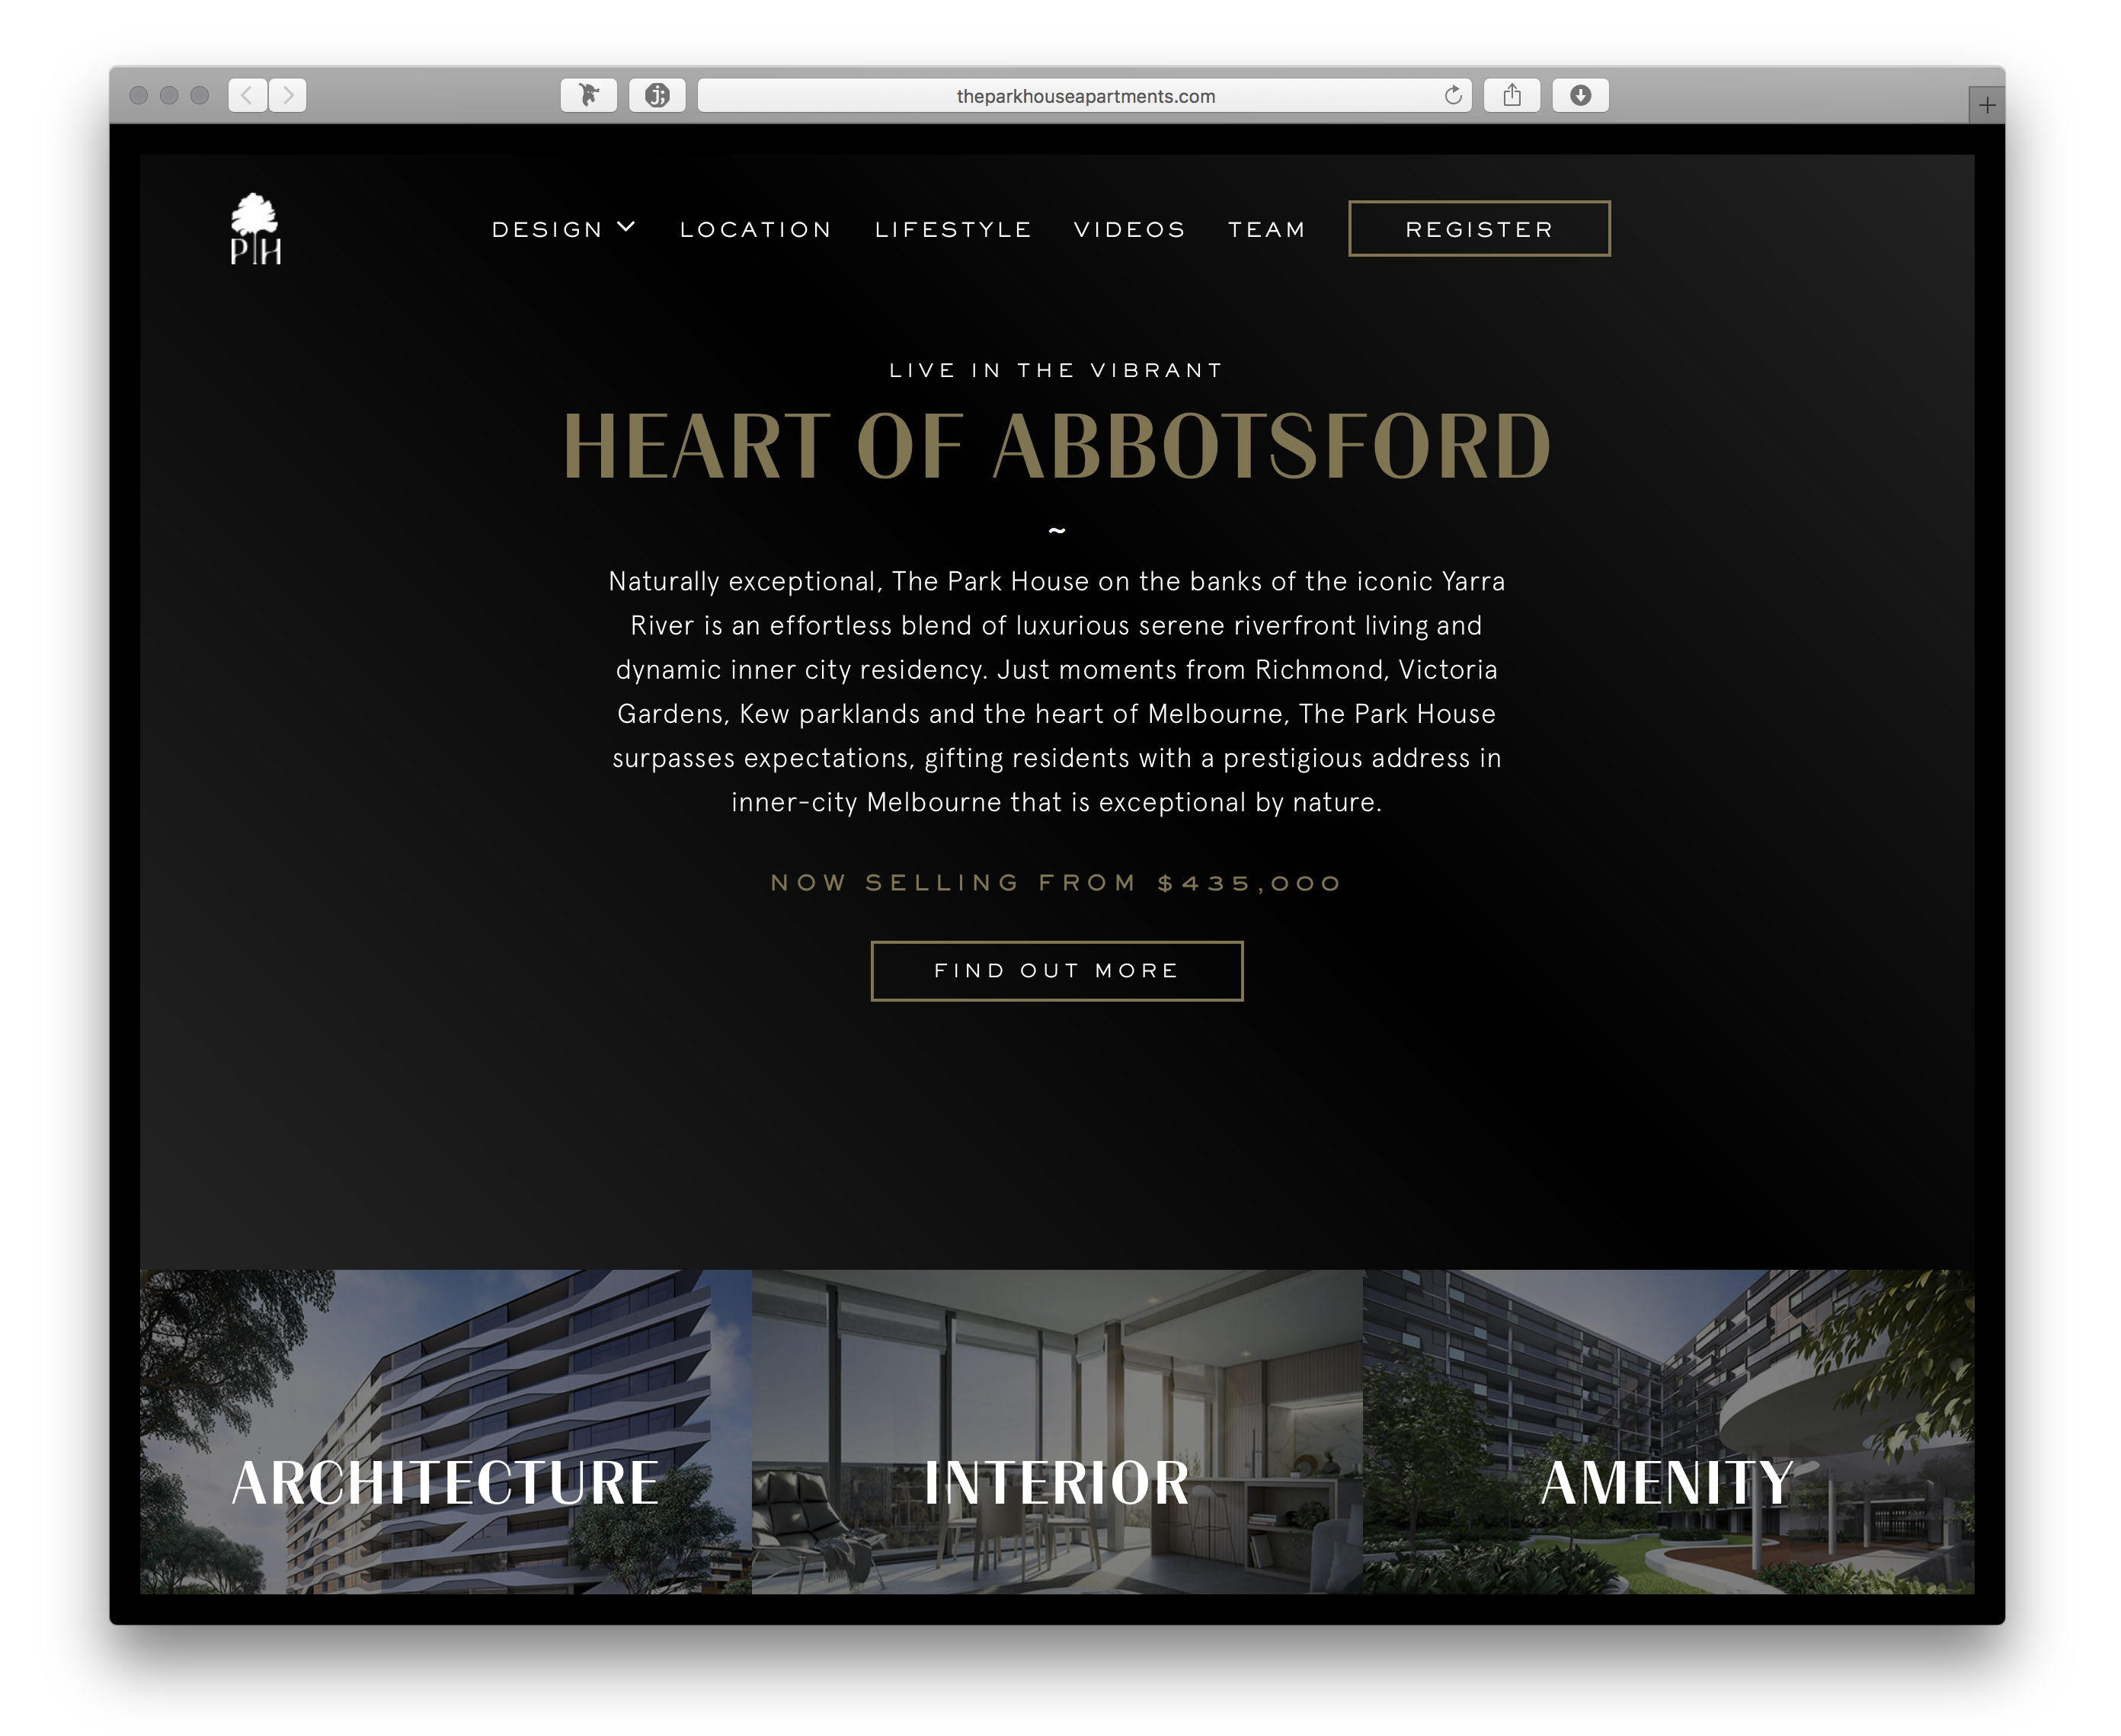 The Park House Apartments Promotional Website Fonts In Use